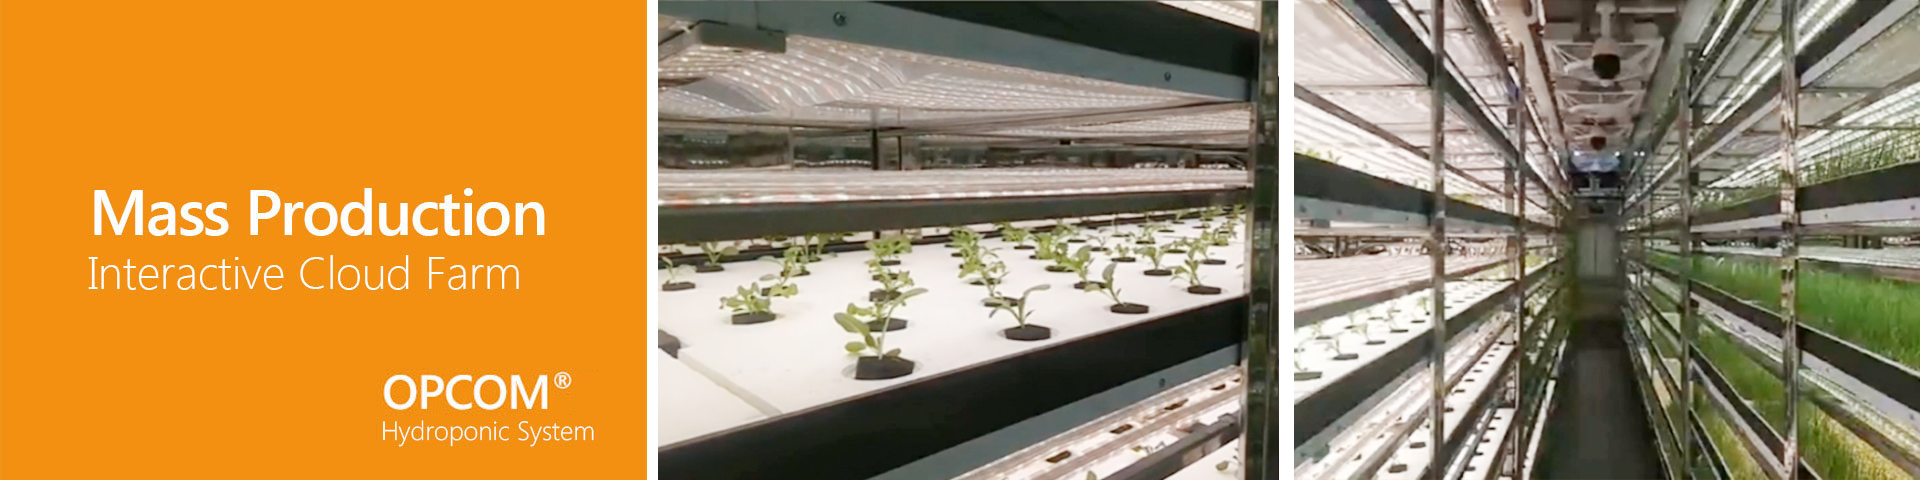 Application for Mass Production-Interactive Cloud Farm, Hydroponic System